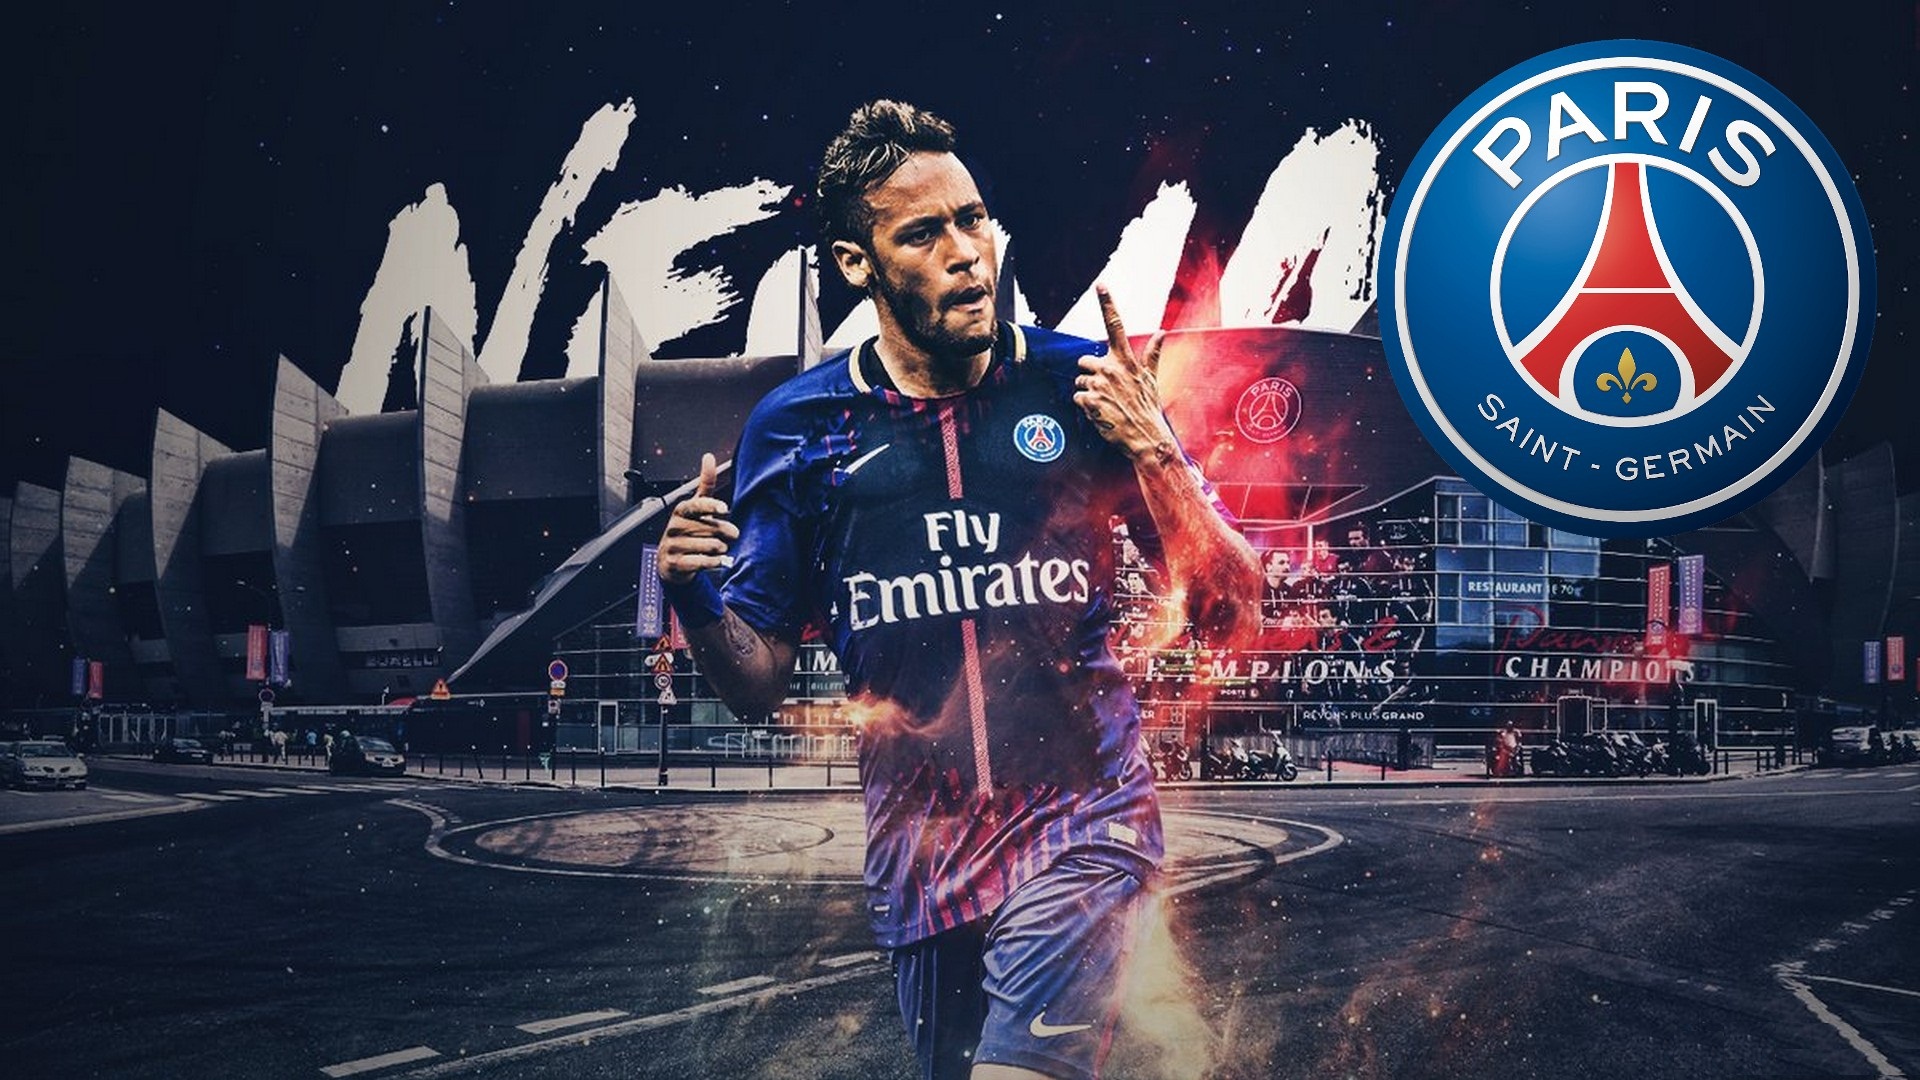 Neymar PSG HD Wallpapers with resolution 1920x1080 pixel. You can make this wallpaper for your Mac or Windows Desktop Background, iPhone, Android or Tablet and another Smartphone device